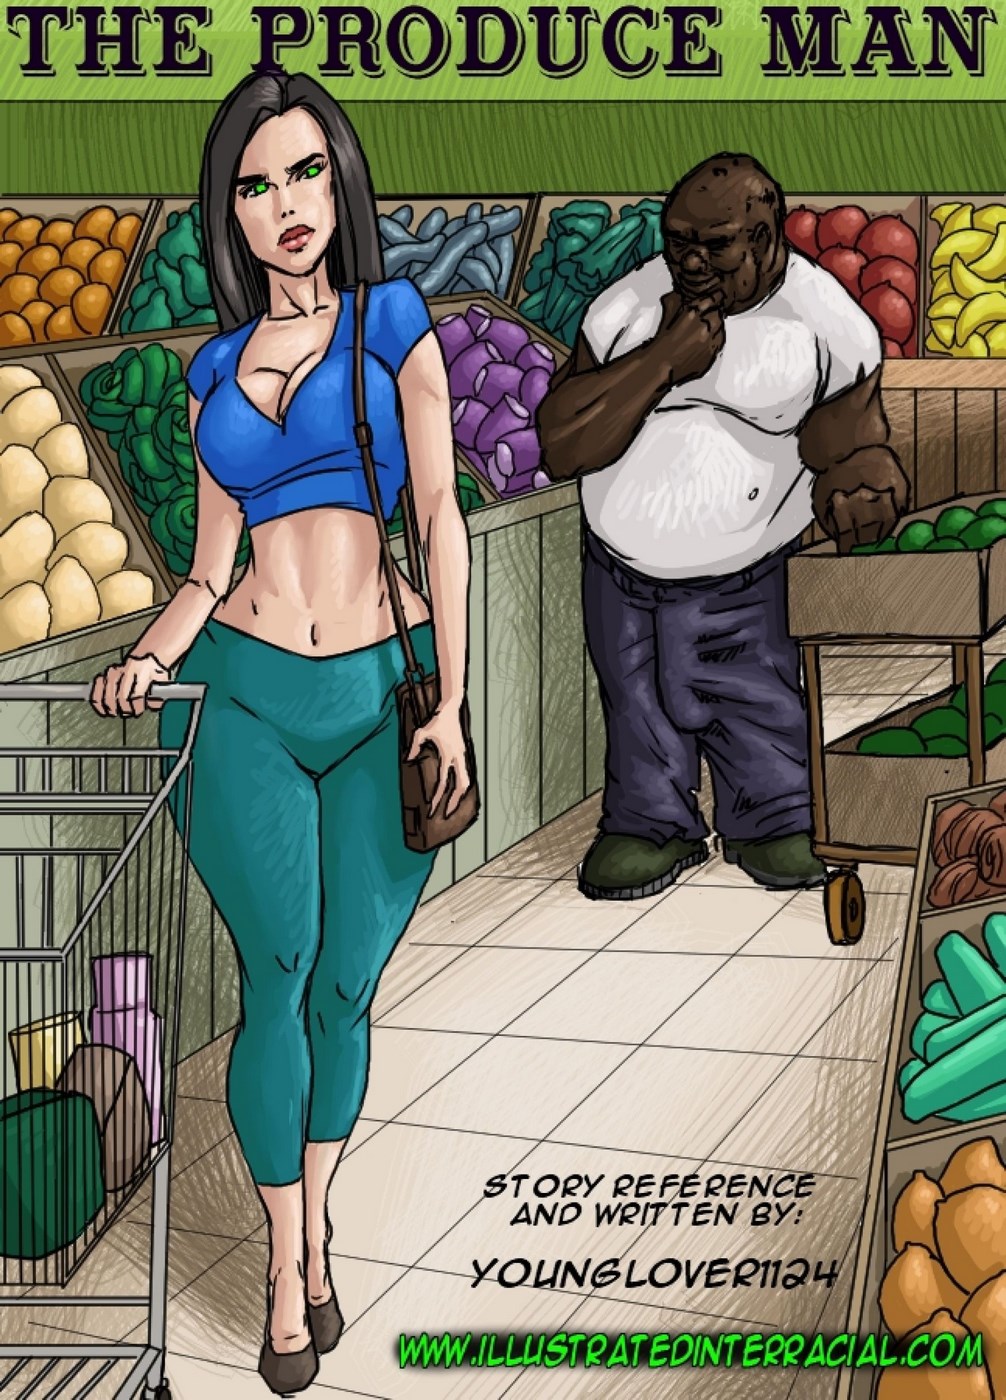 The Produce Man- Illustrated Interracial.